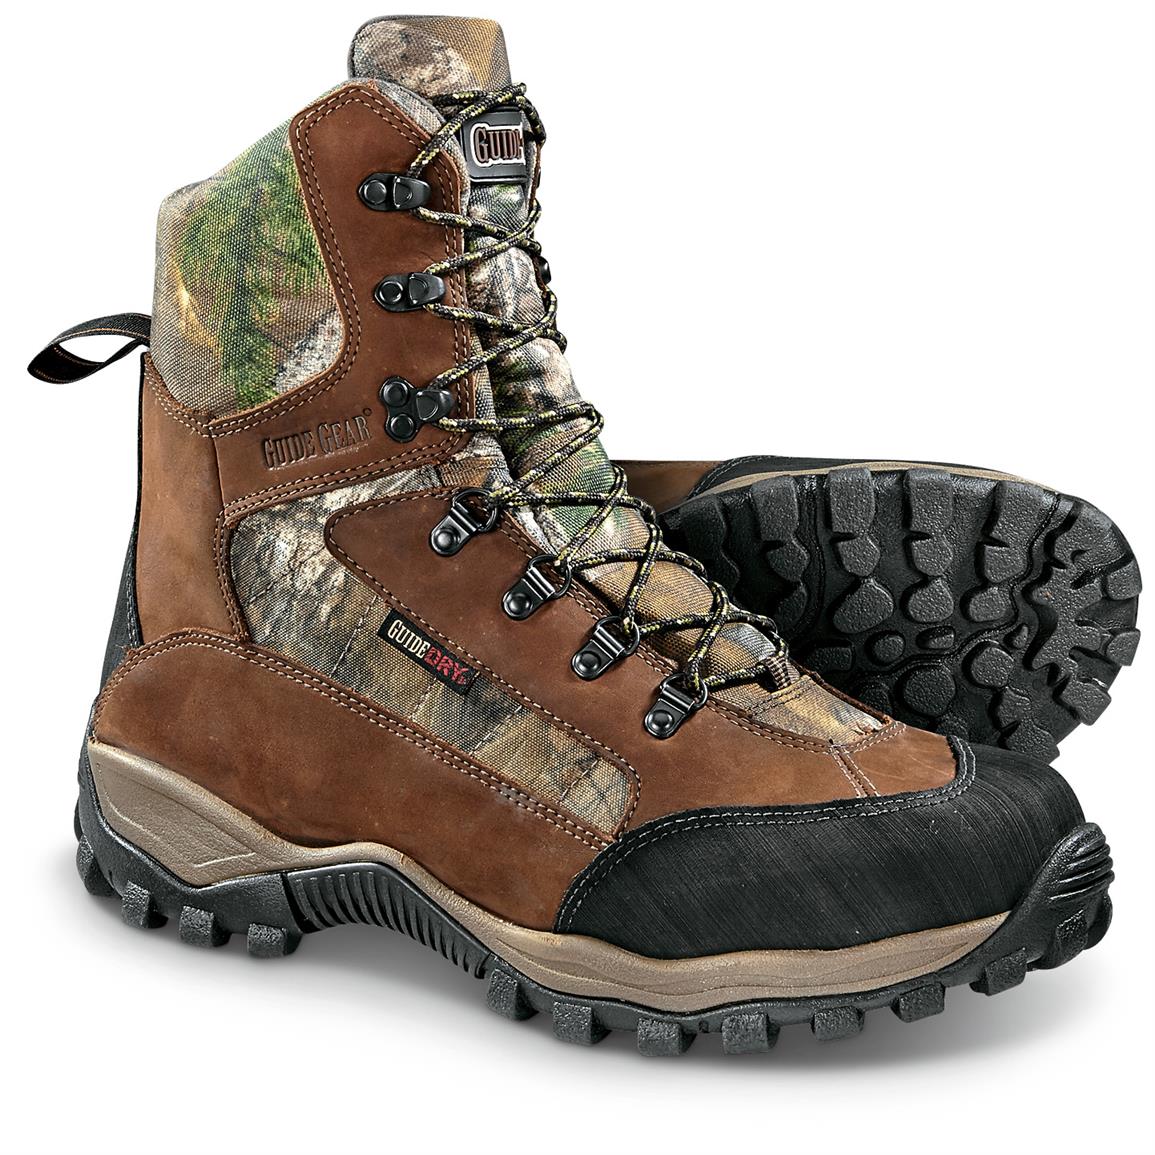 Guide Gear Sentry Hunting Boots, Waterproof, 2,000 Gram Insulated ...